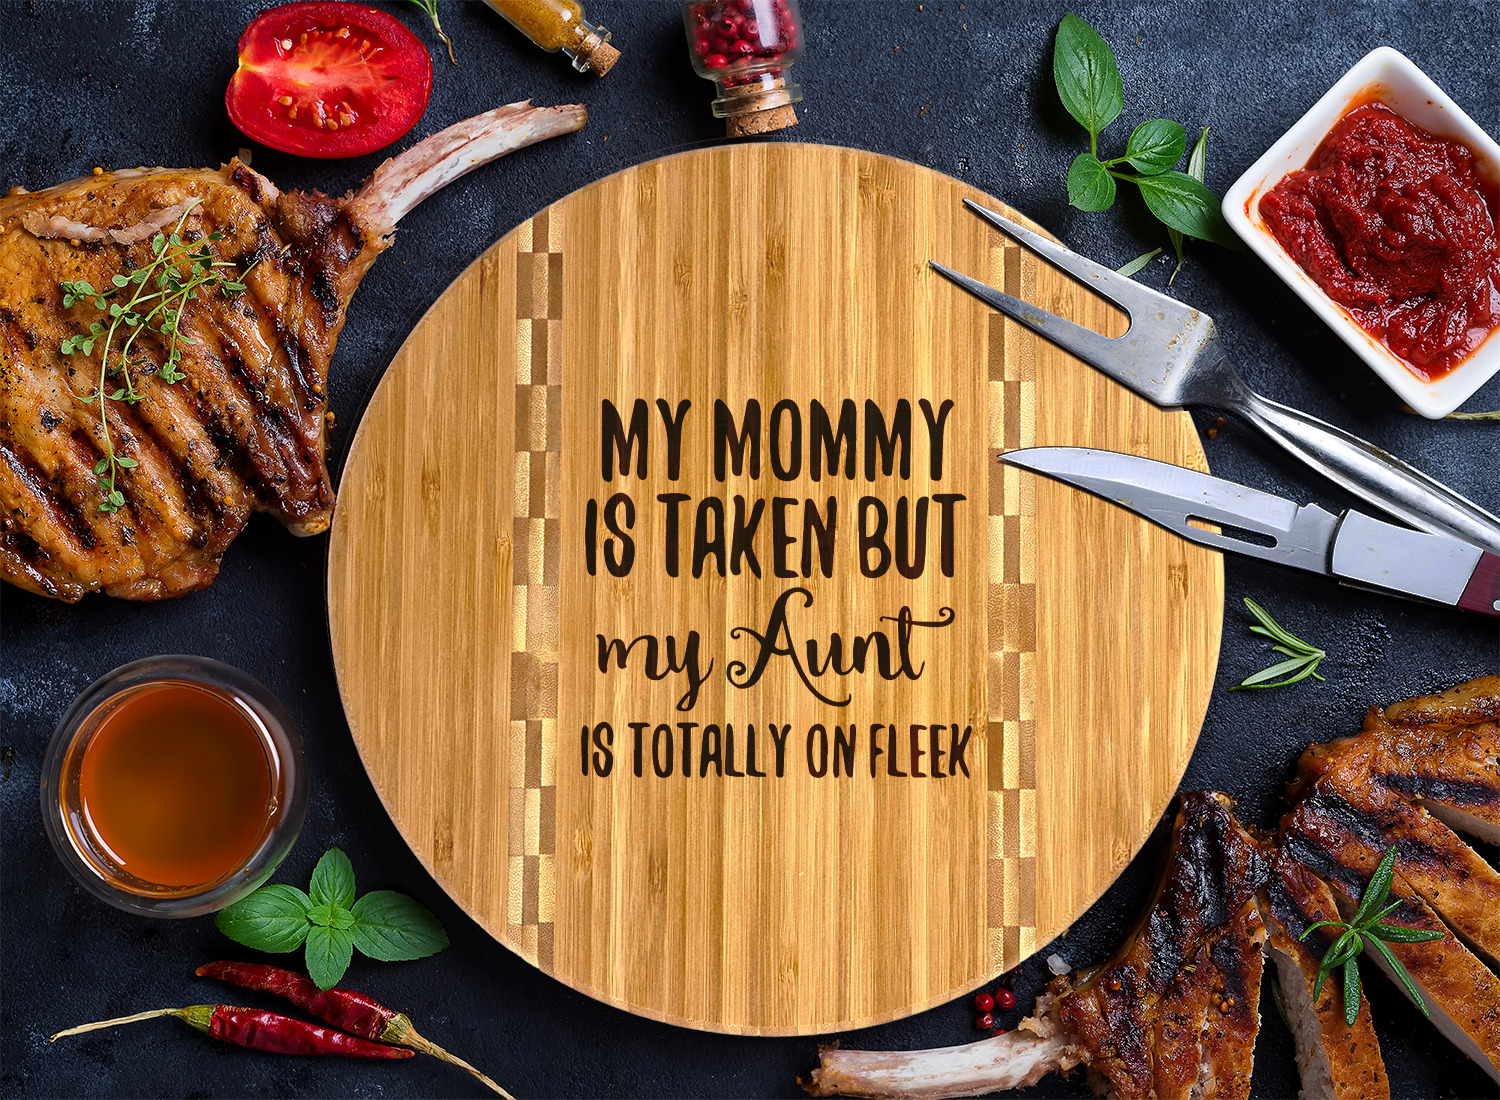 Aunt Quotes and Sayings Design Custom Bamboo Cutting Board